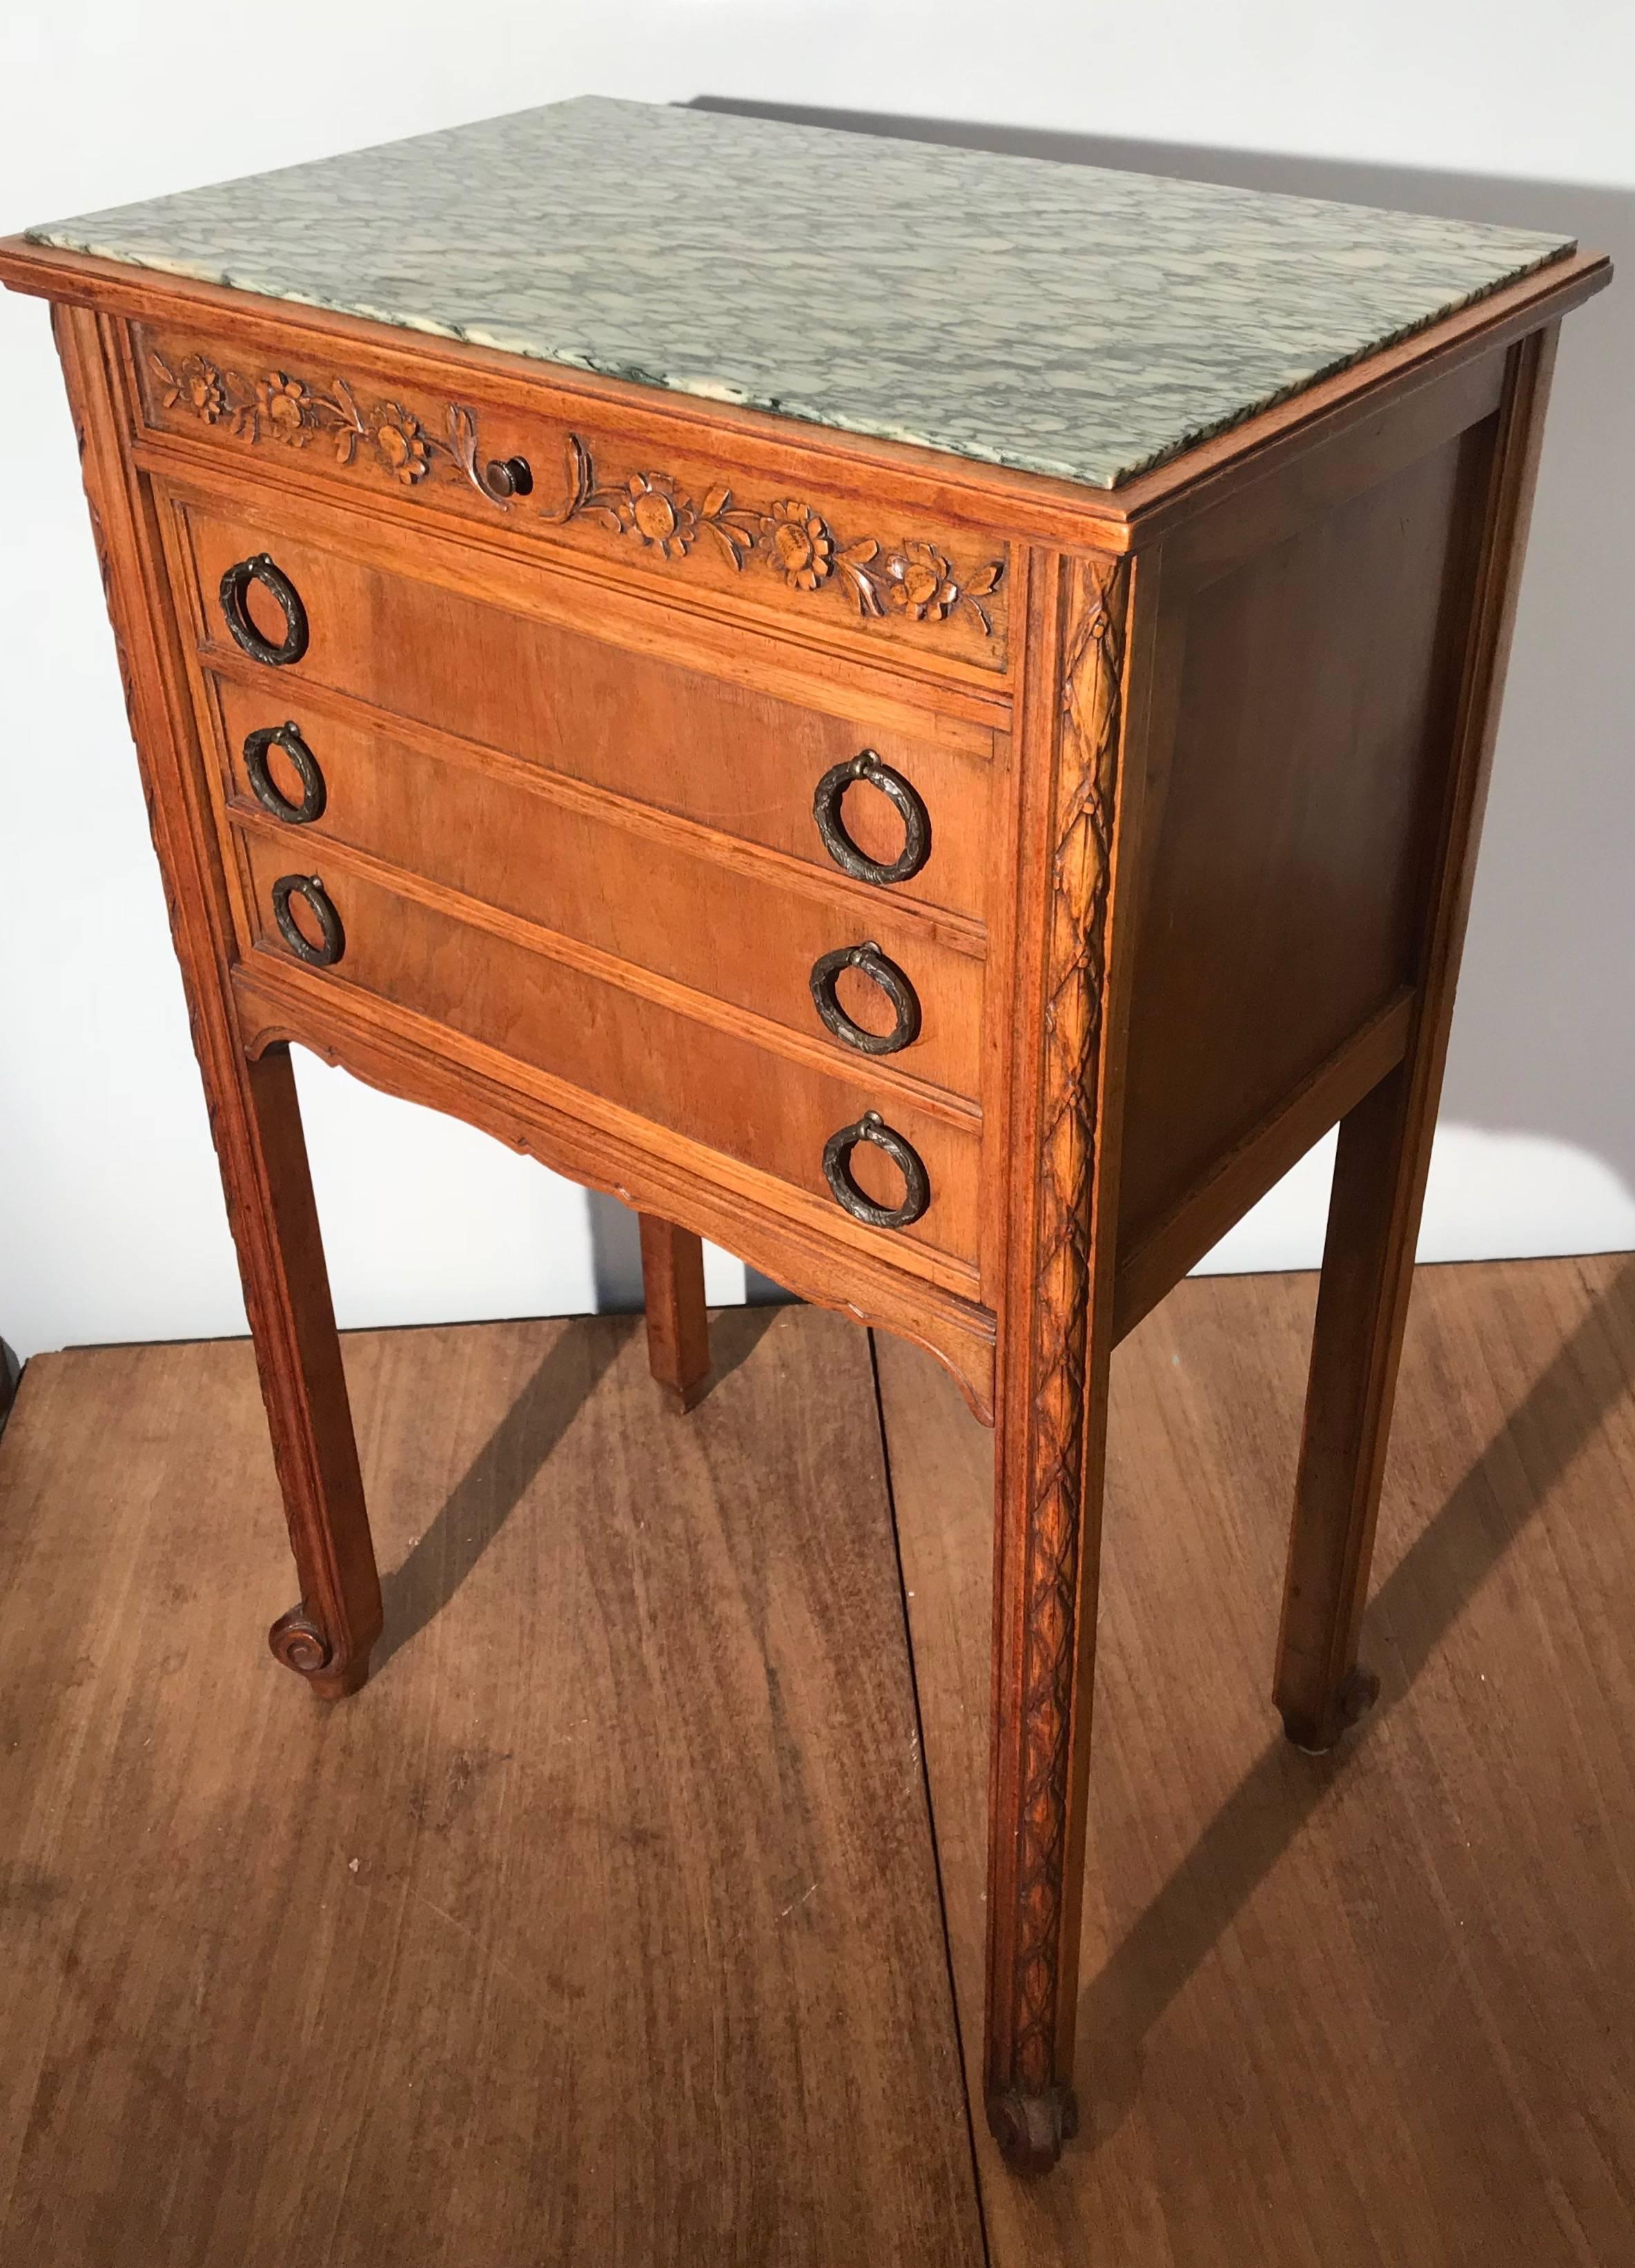 1900s French Hand-Carved Nutwood Side Table / Cabinet with Marble Top & Interior 3